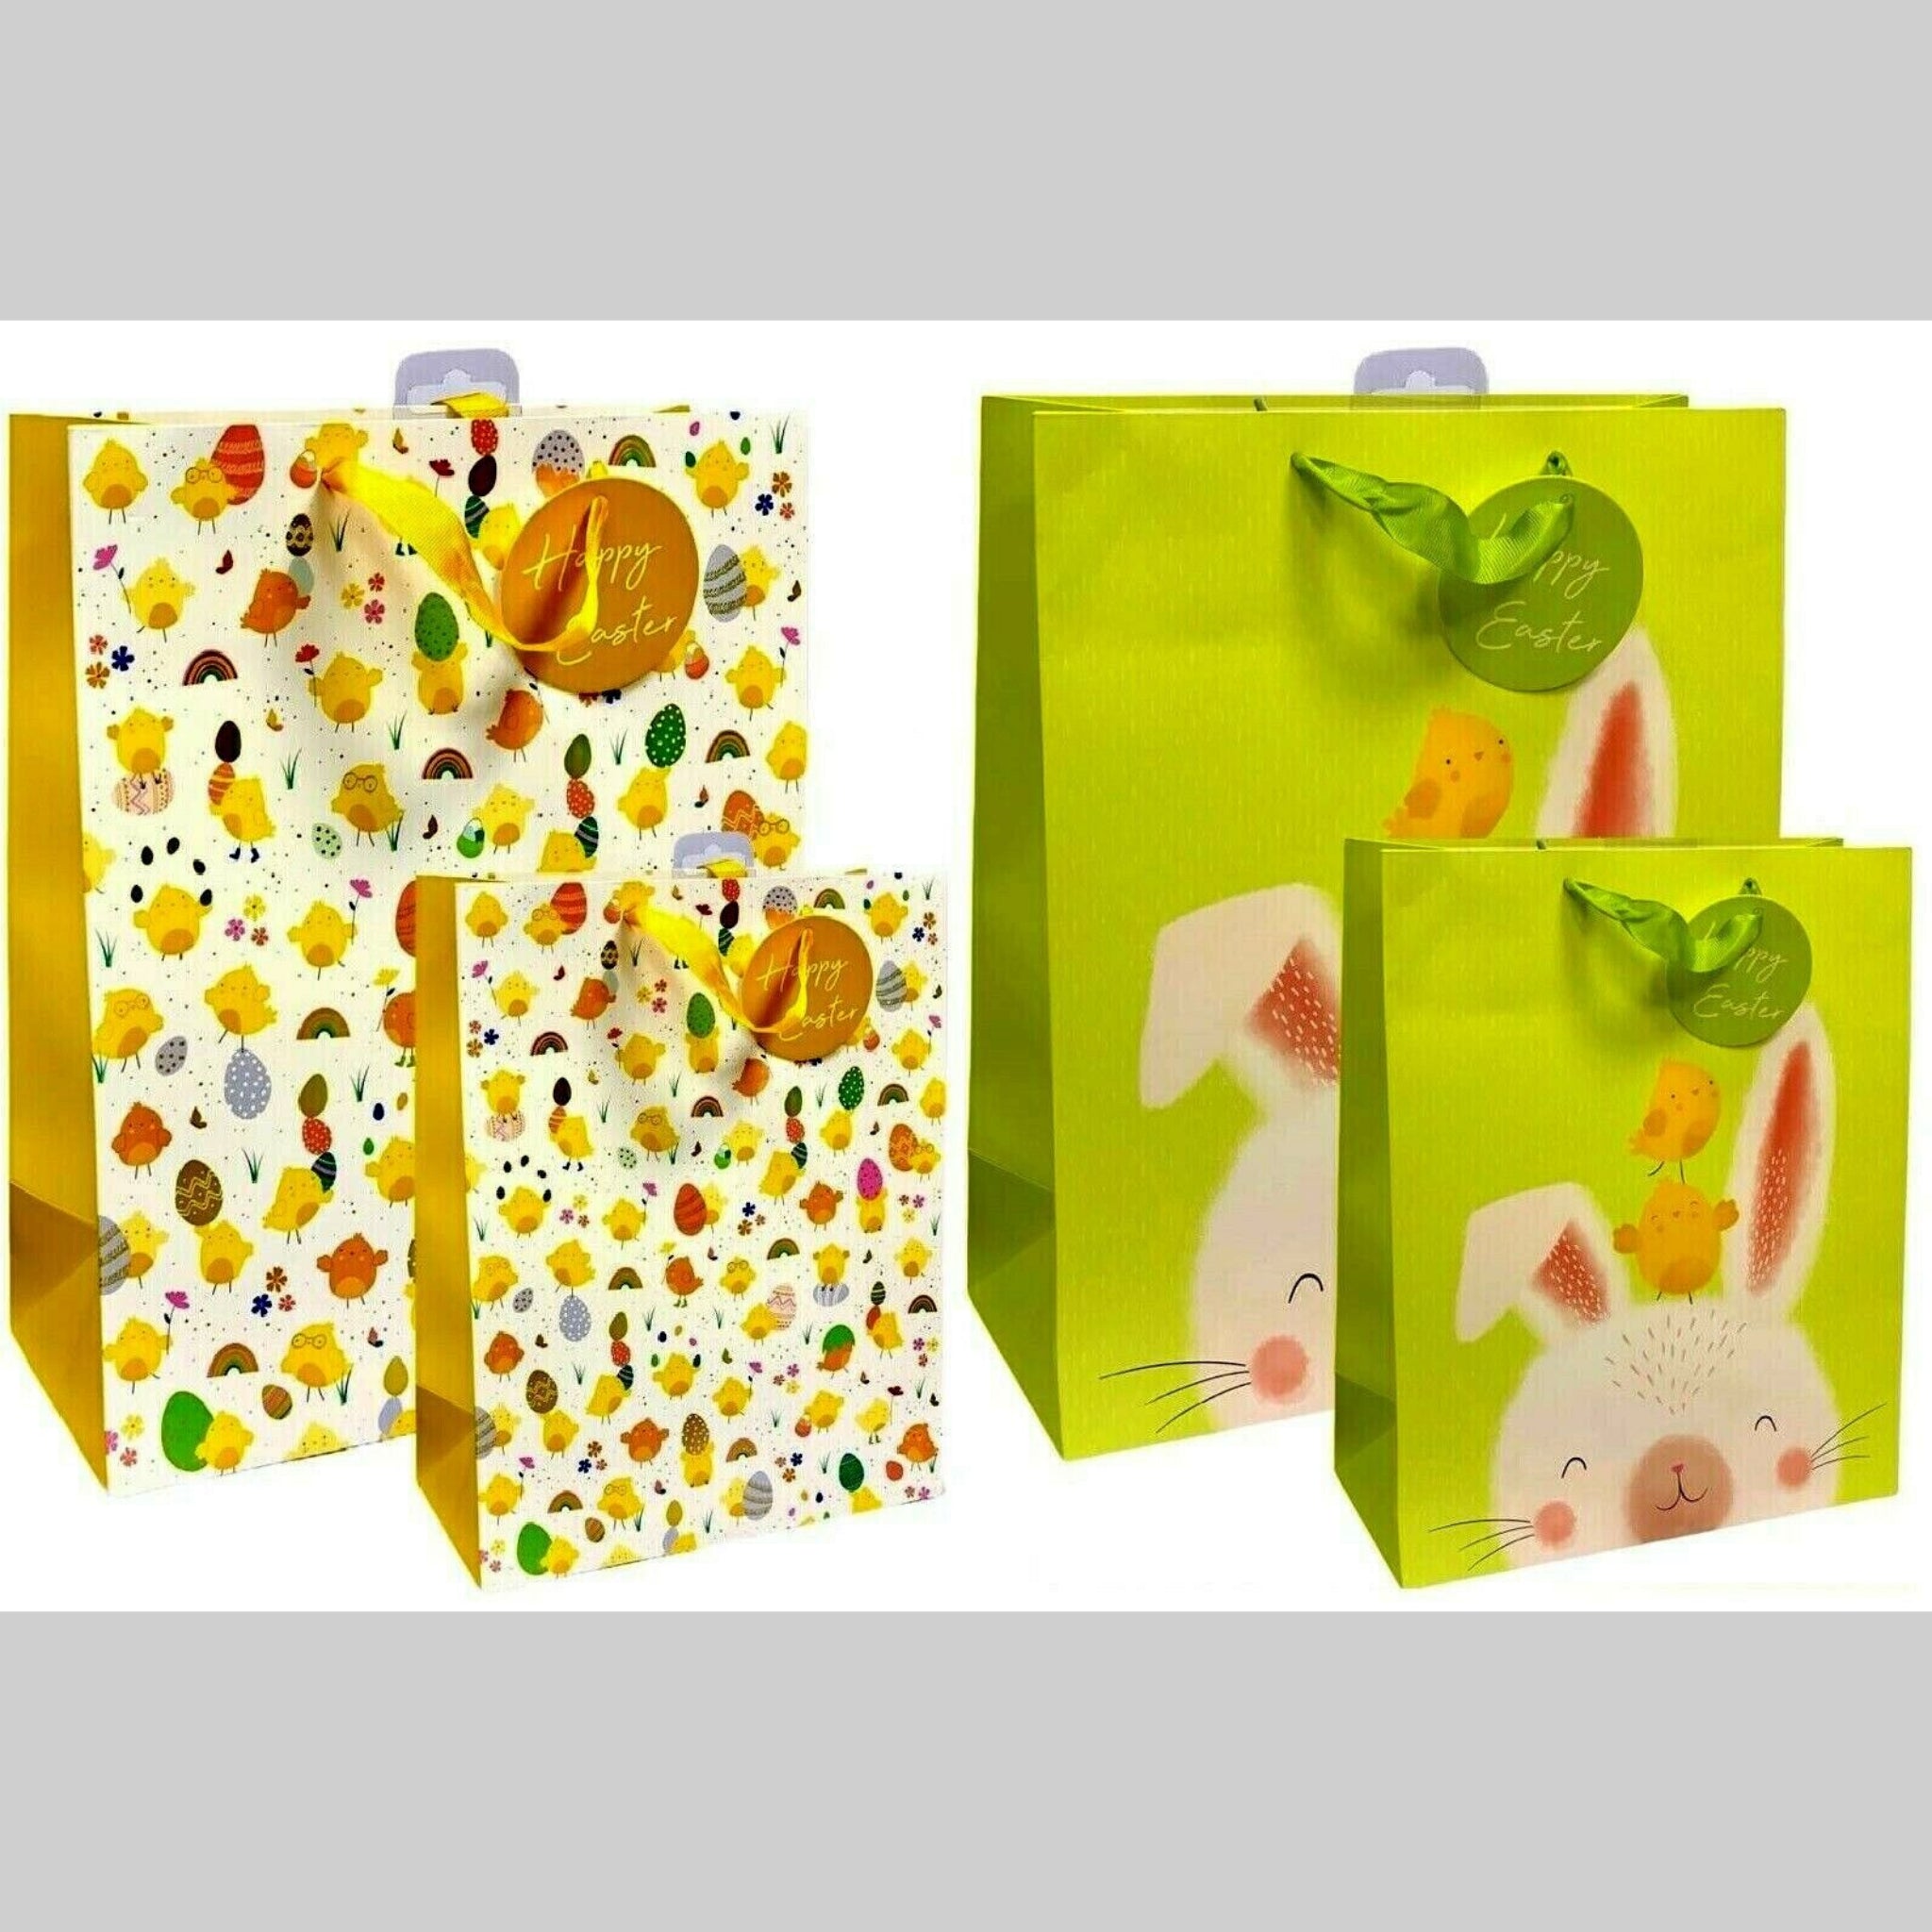 Beclen Harp L/M Size Luxury Easter Traditional Cute Chicks/Bunnies Print Present/Gift Bags With ''Happy Easter'' Tag